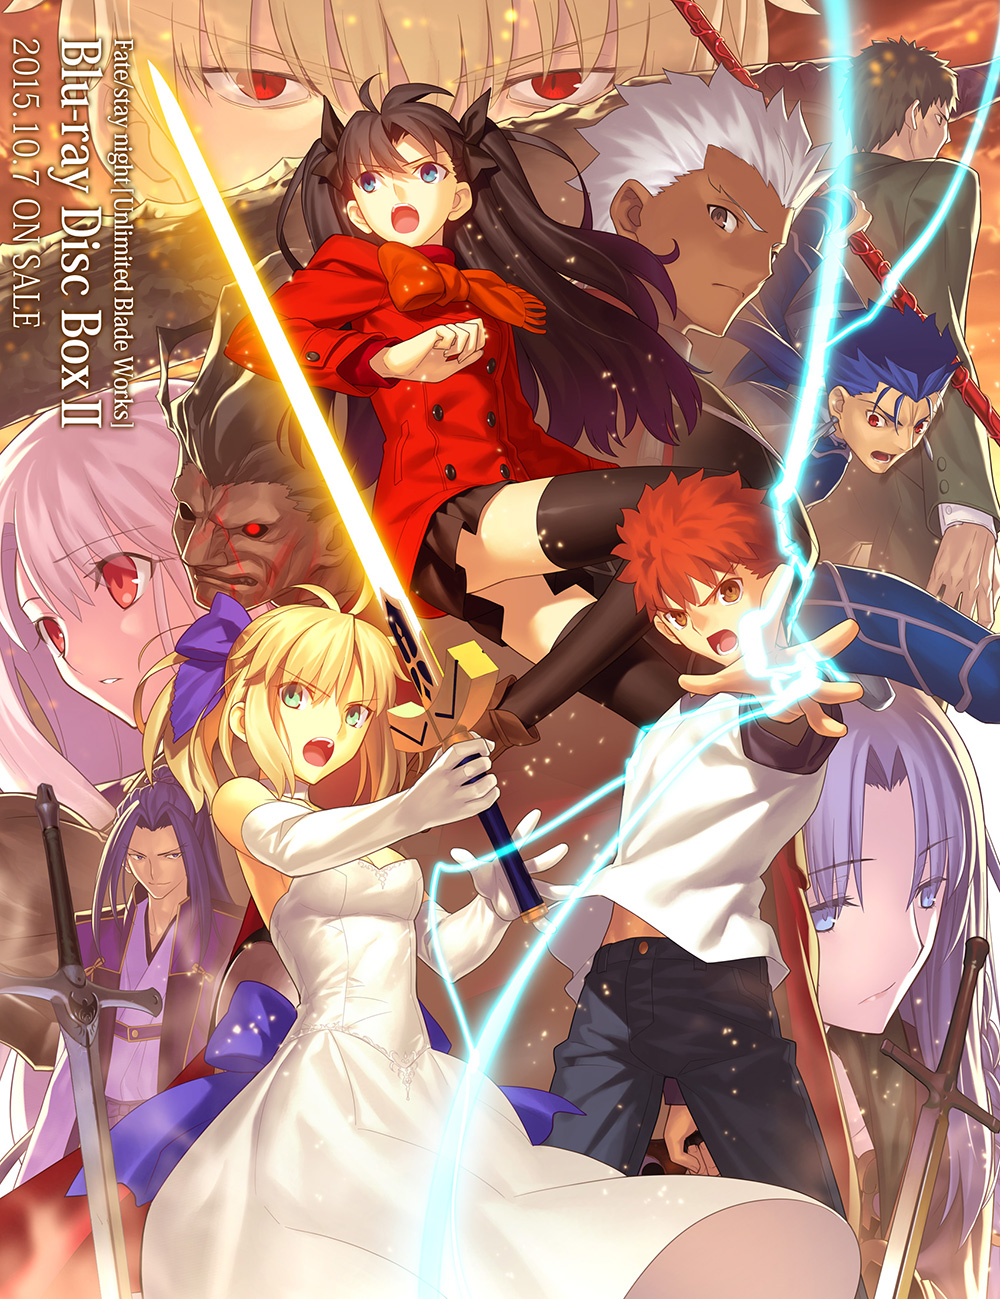 Fate-stay-night-Unlimited-Blade-Works-Blu-ray-Box-2-Visual